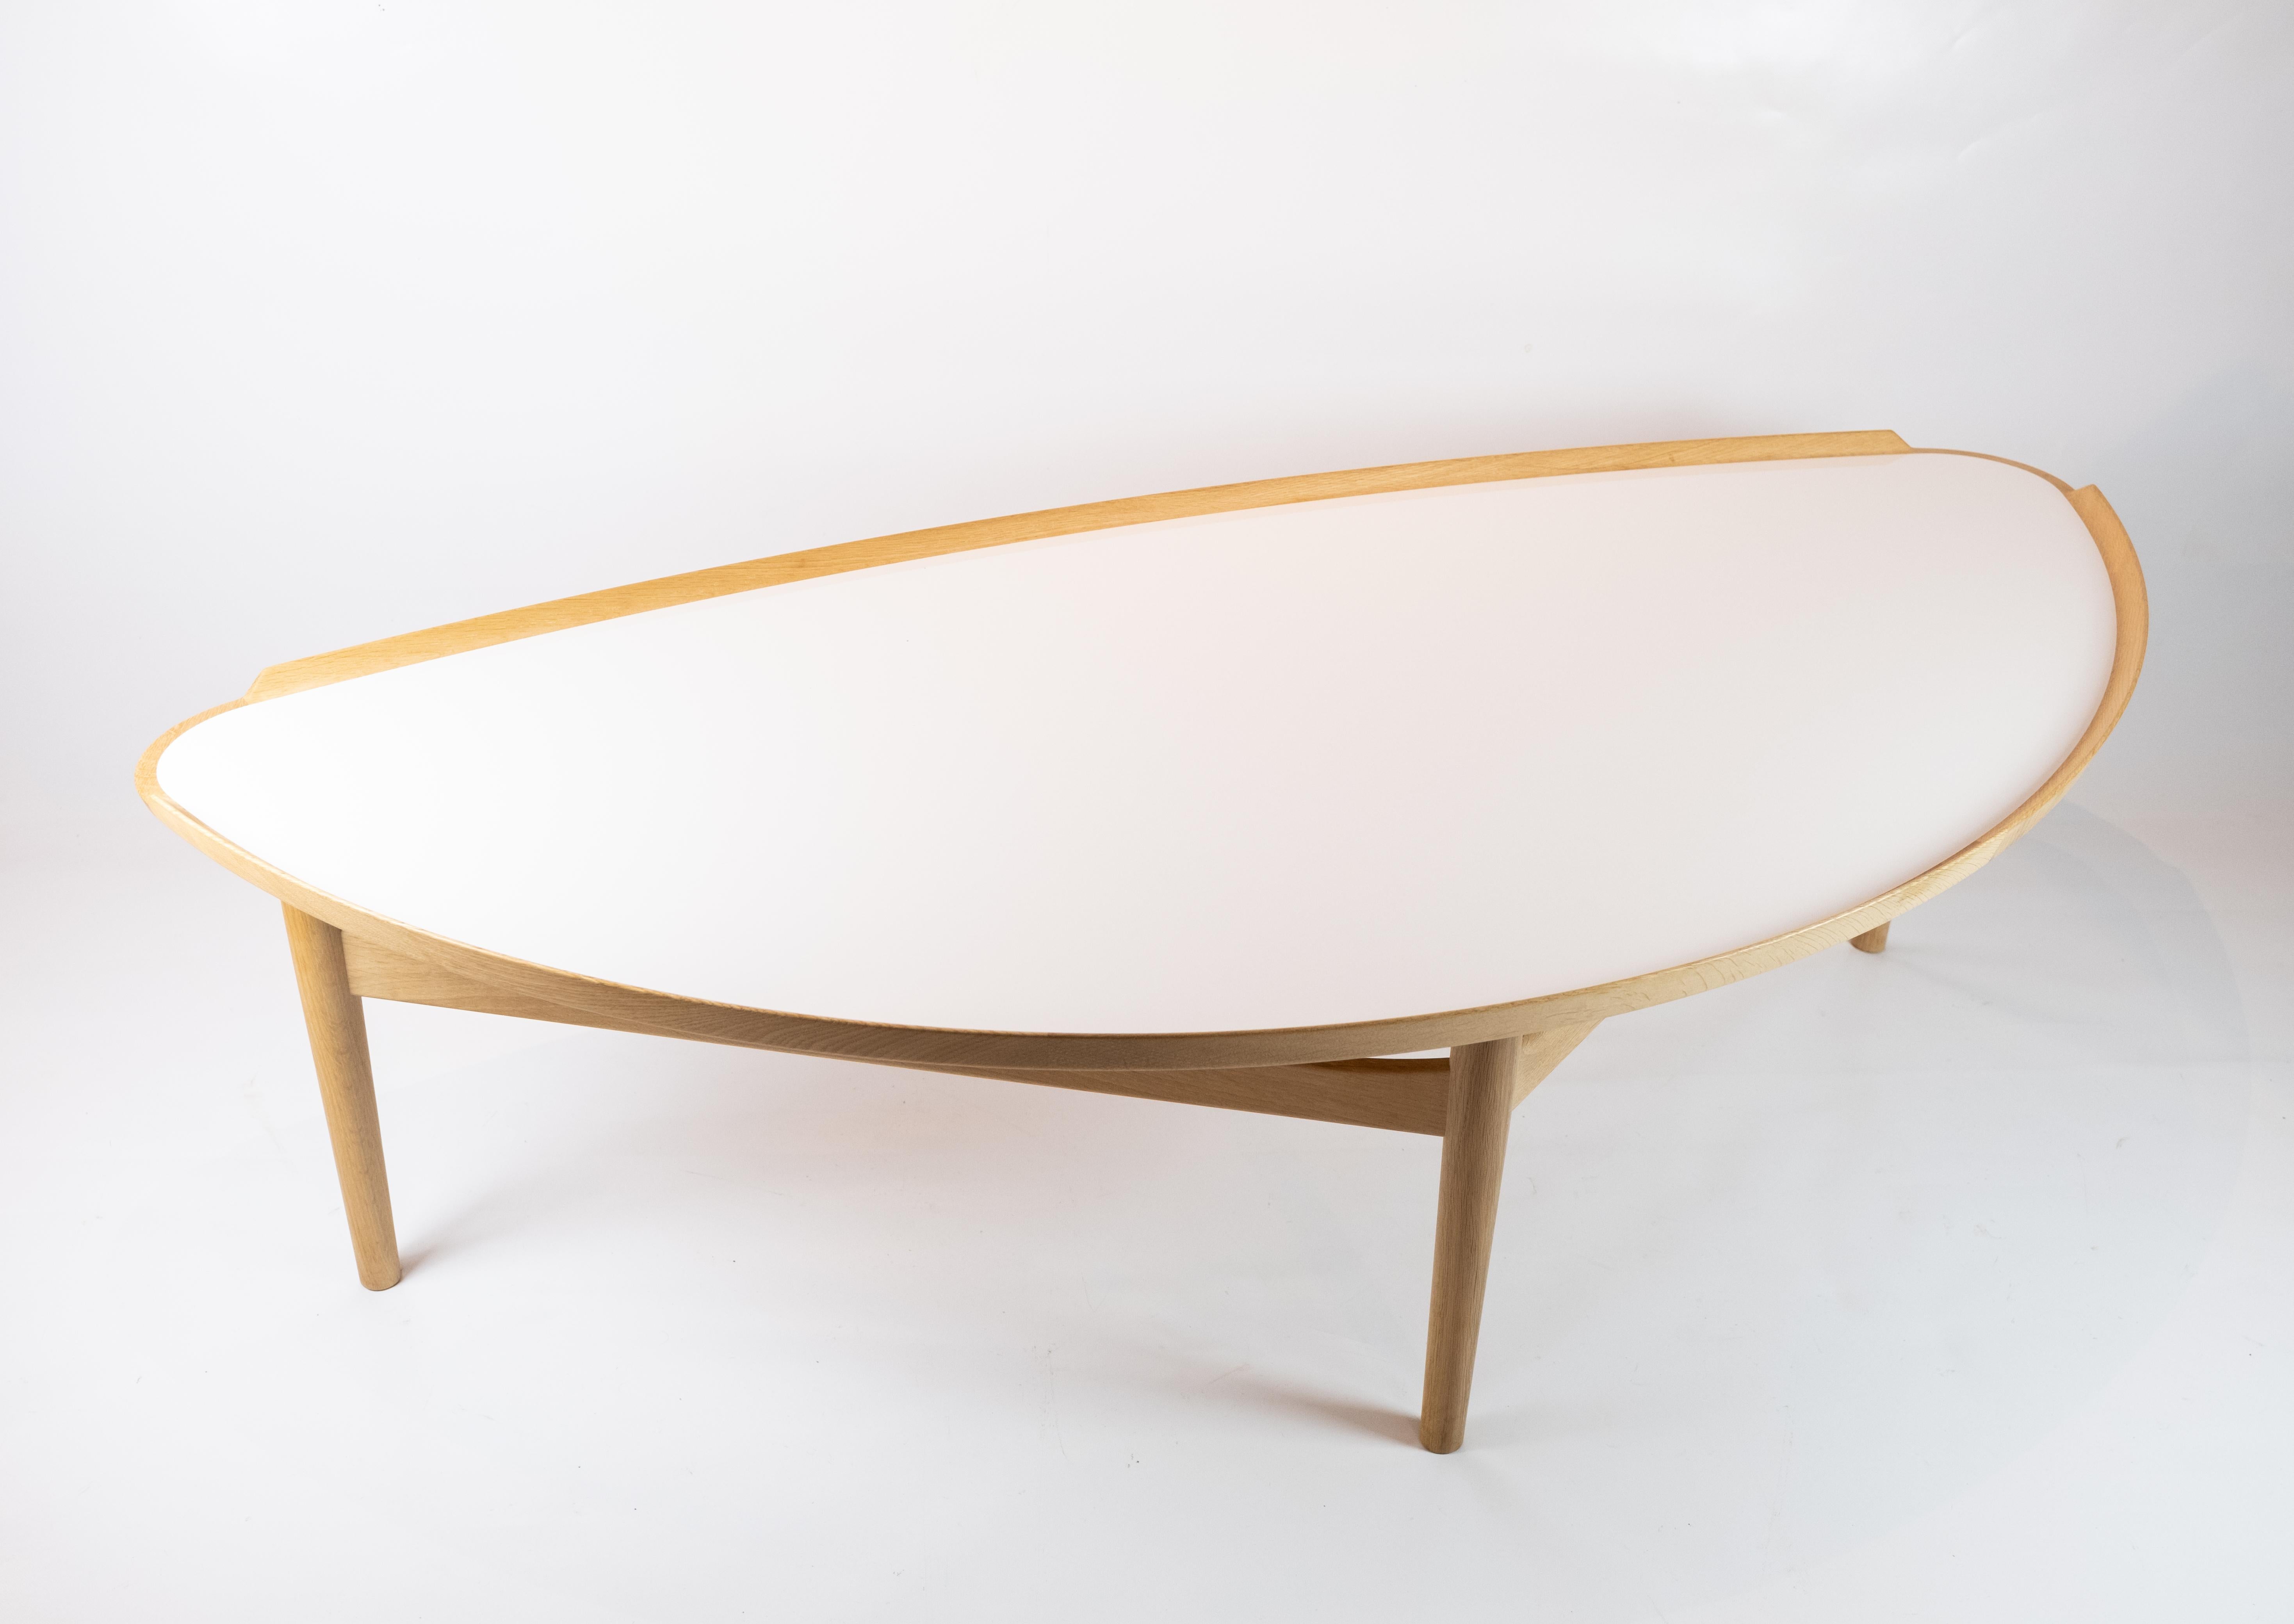 Danish Cocktail Table of Oak and White Laminate Designed by Finn Juhl in 1951